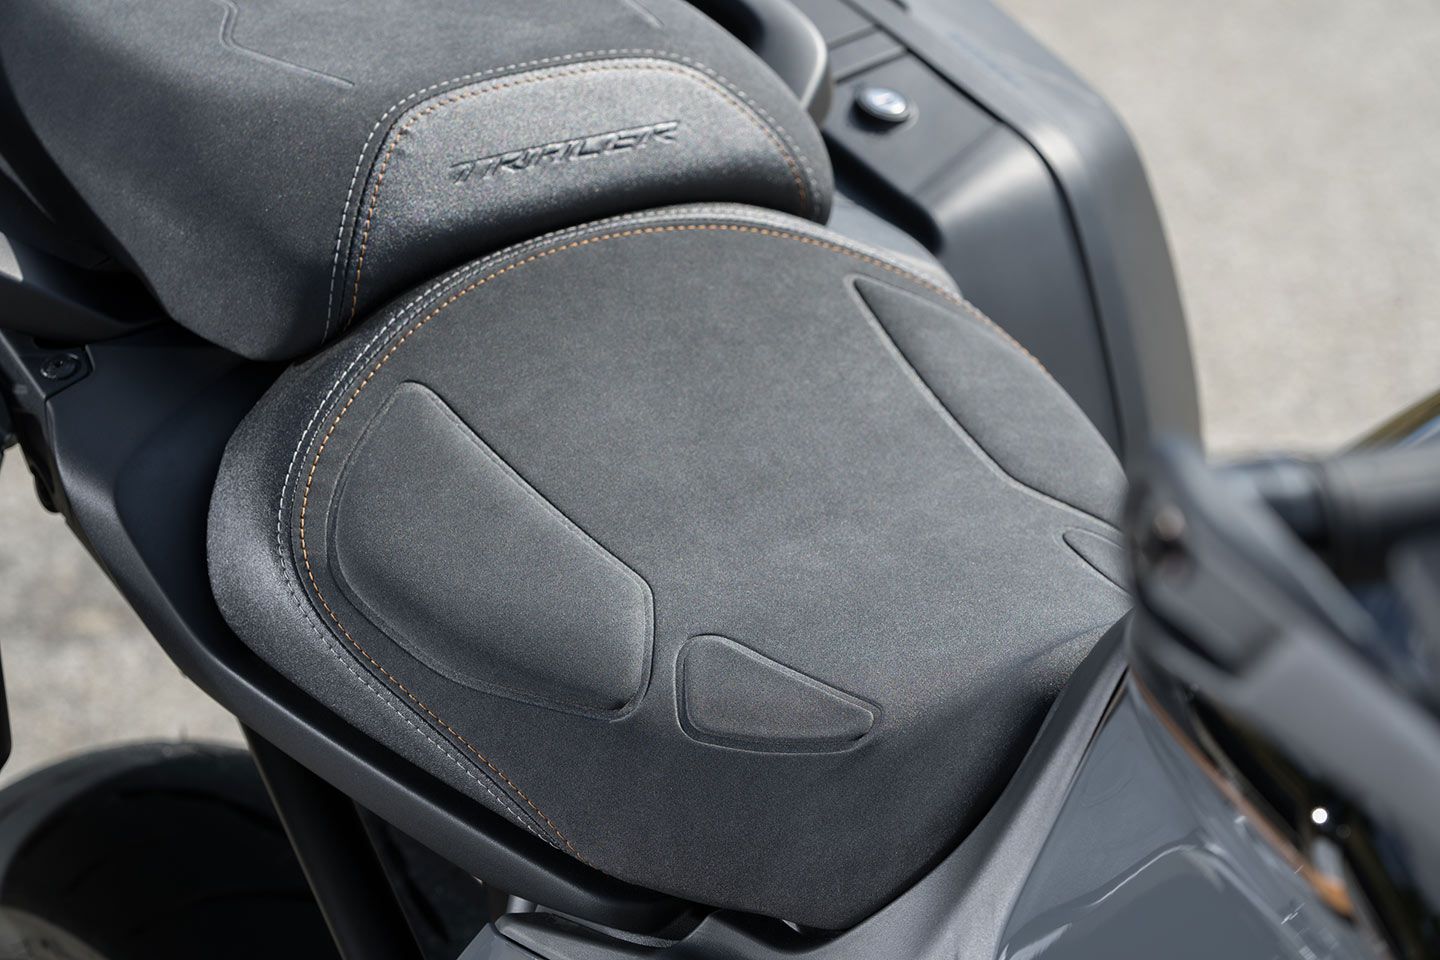 Both rider and passenger seats include new seat covers. The rider seat offers two levels of height adjustment to better accommodate both shorter and taller operators.